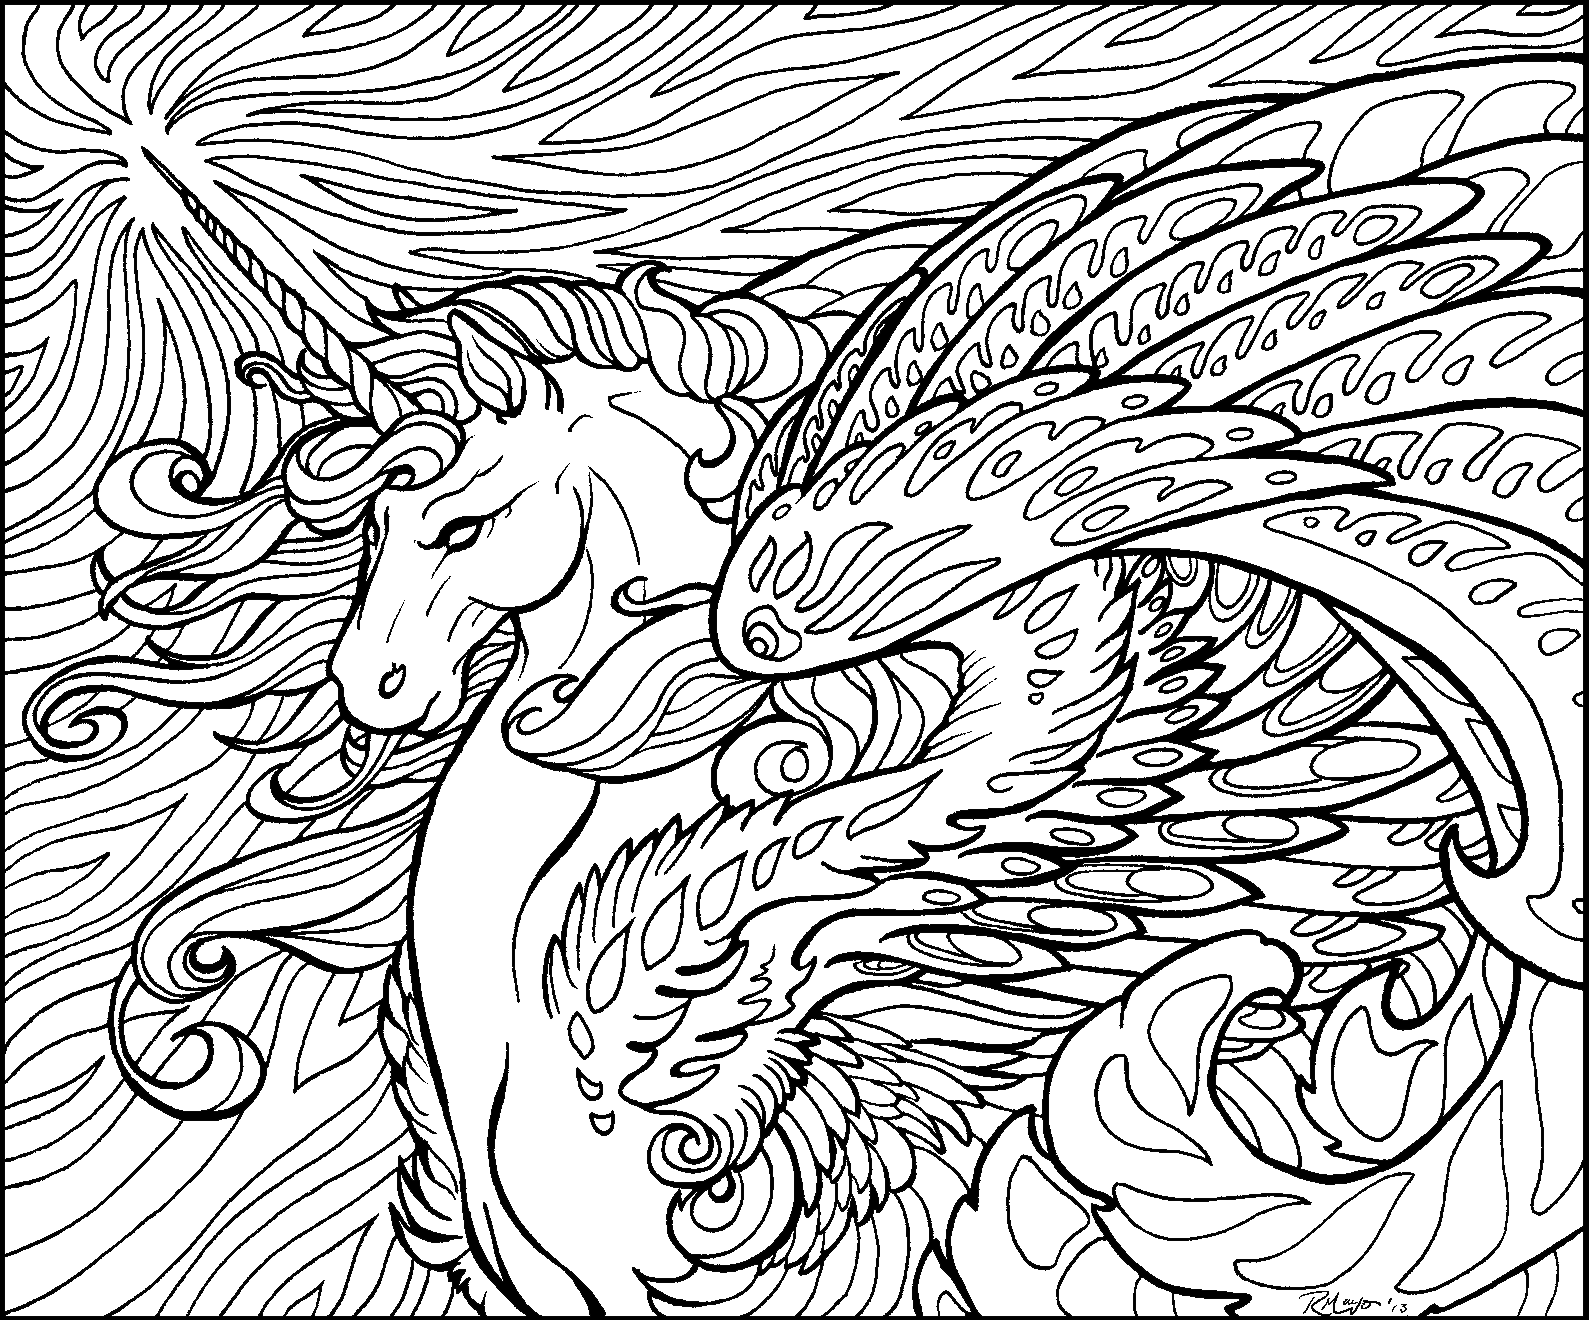 Coloring Hard Pages Unicorn - Colorine.net | #17102